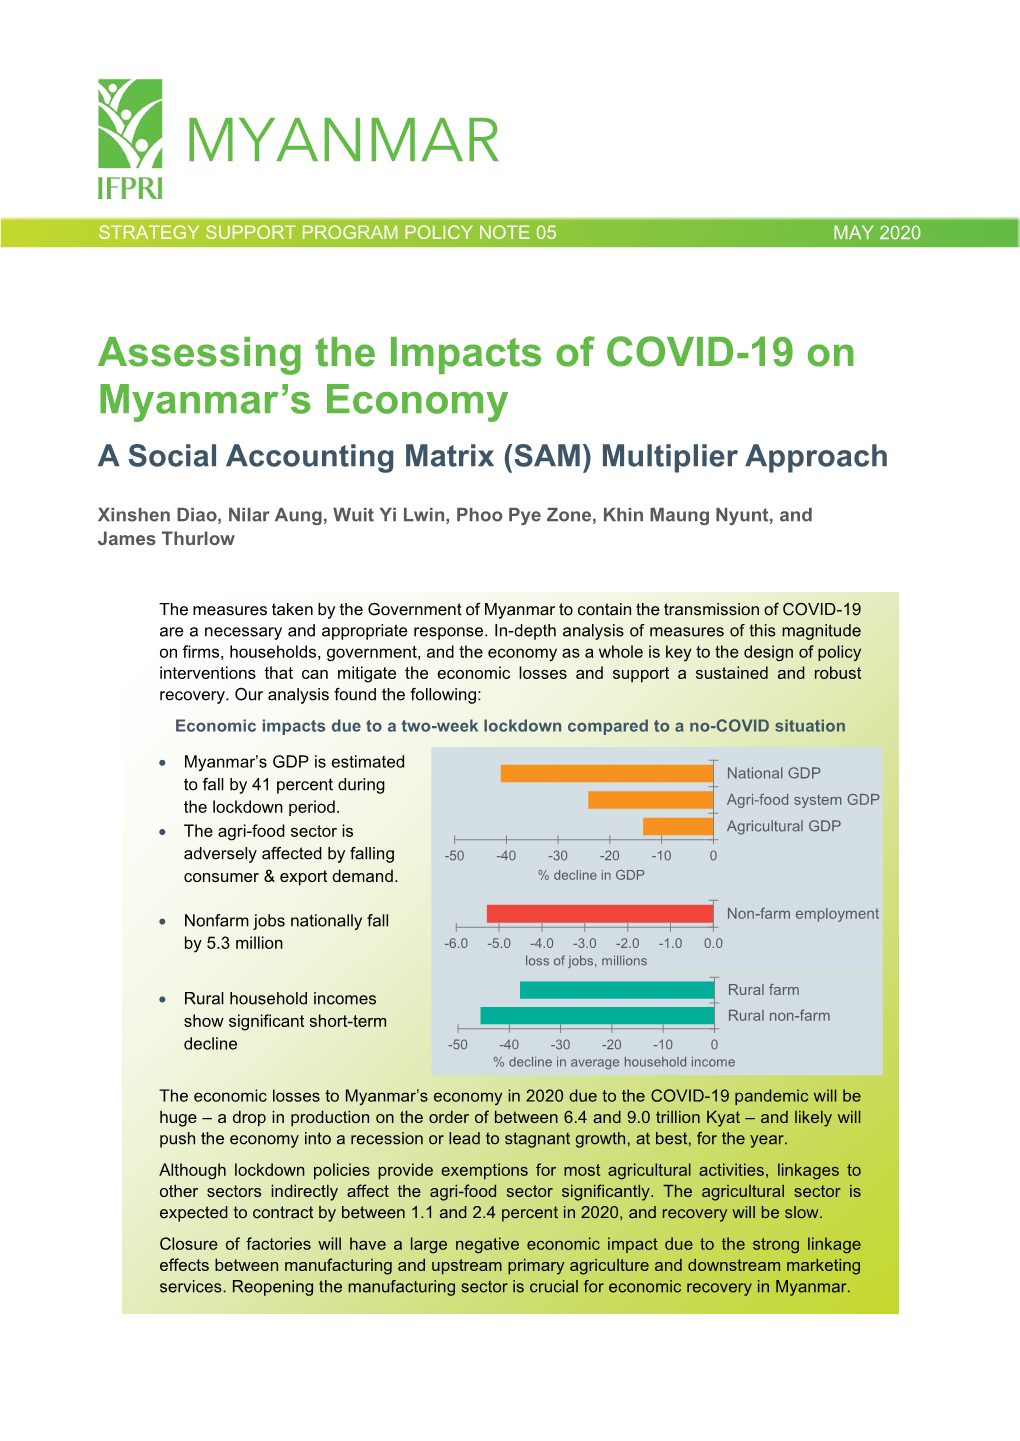 Assessing the Impacts of COVID 19 on Myanmar's Economy